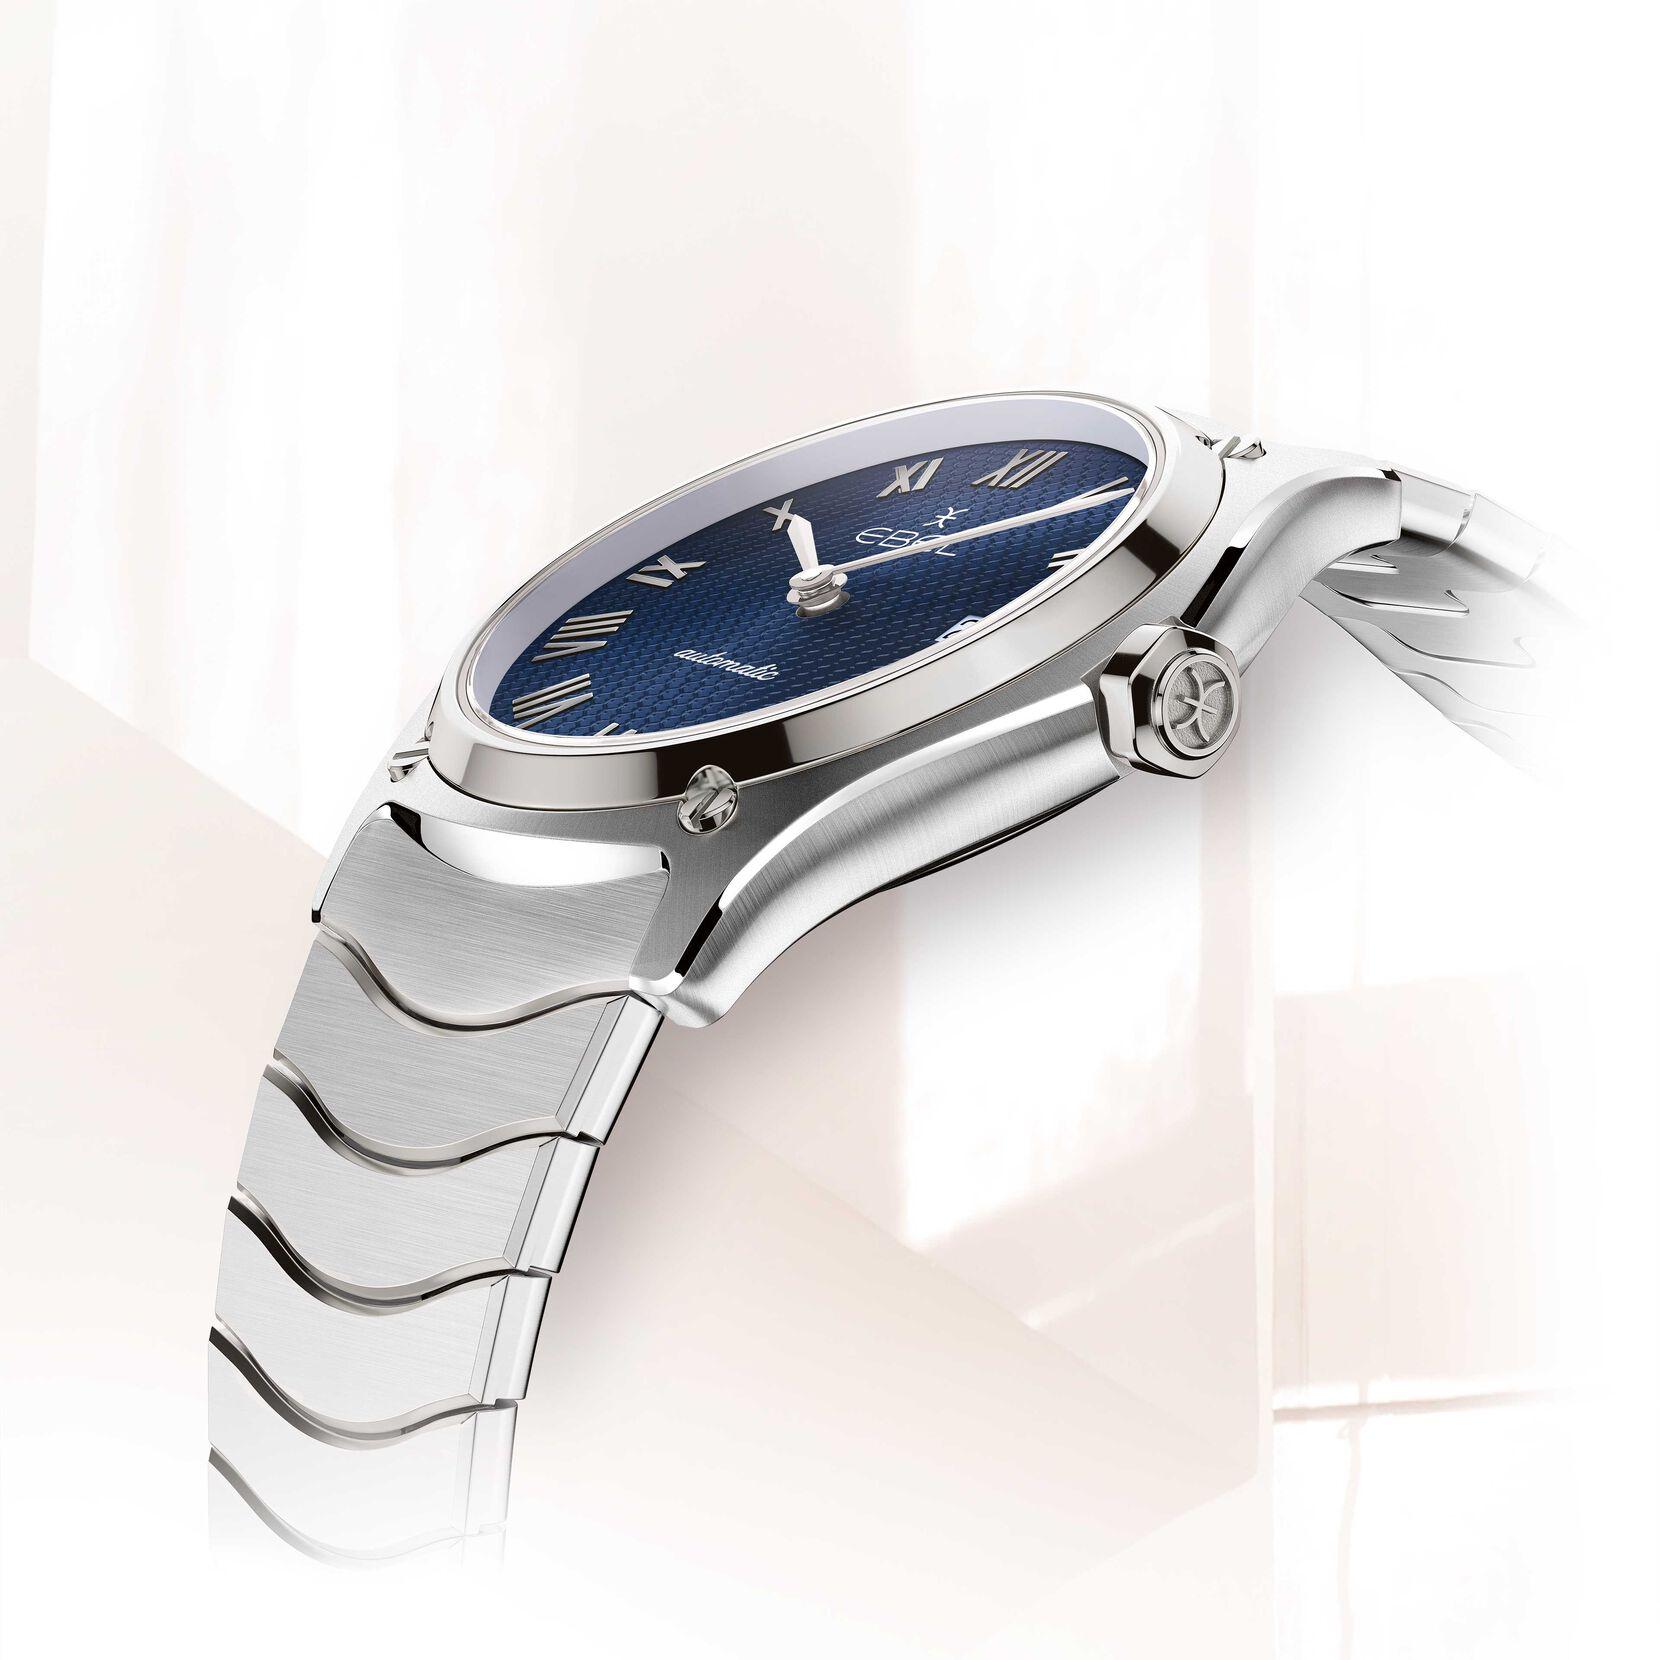 Ebel Sport Classic Watch with Stamped Blue Dial 0